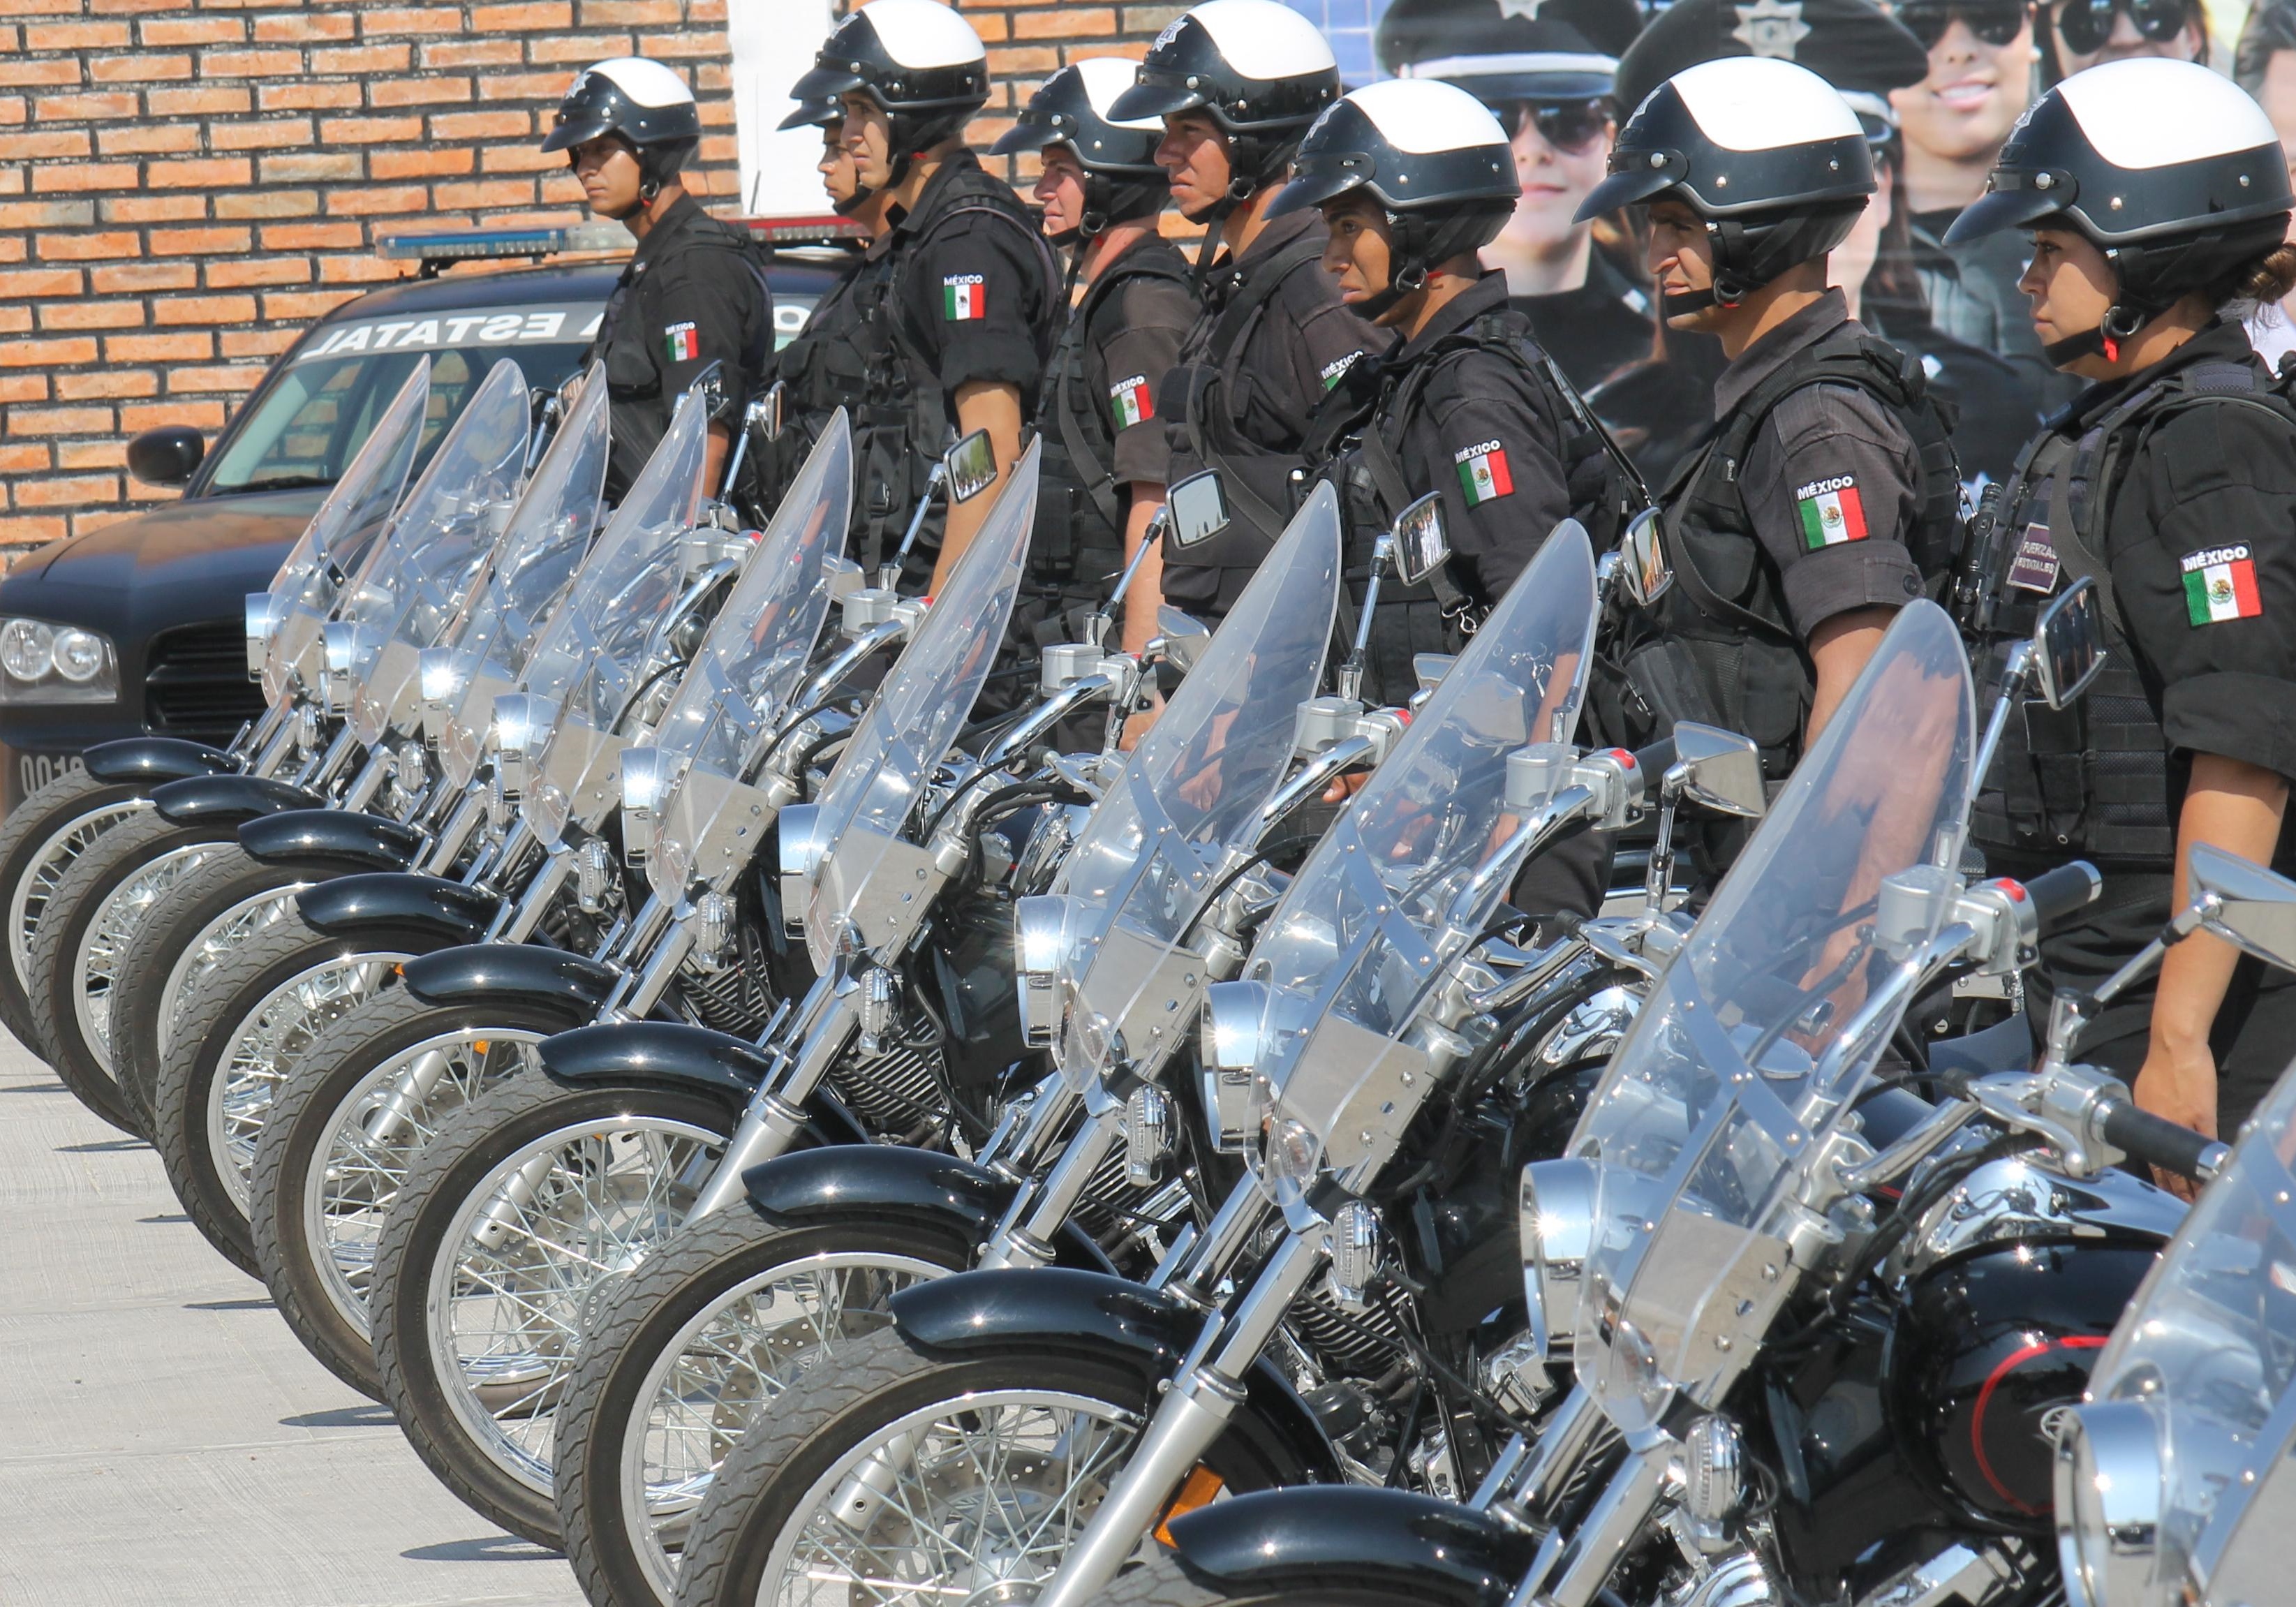 Photo of a line-up of  motorcycle police and their motorcycles.